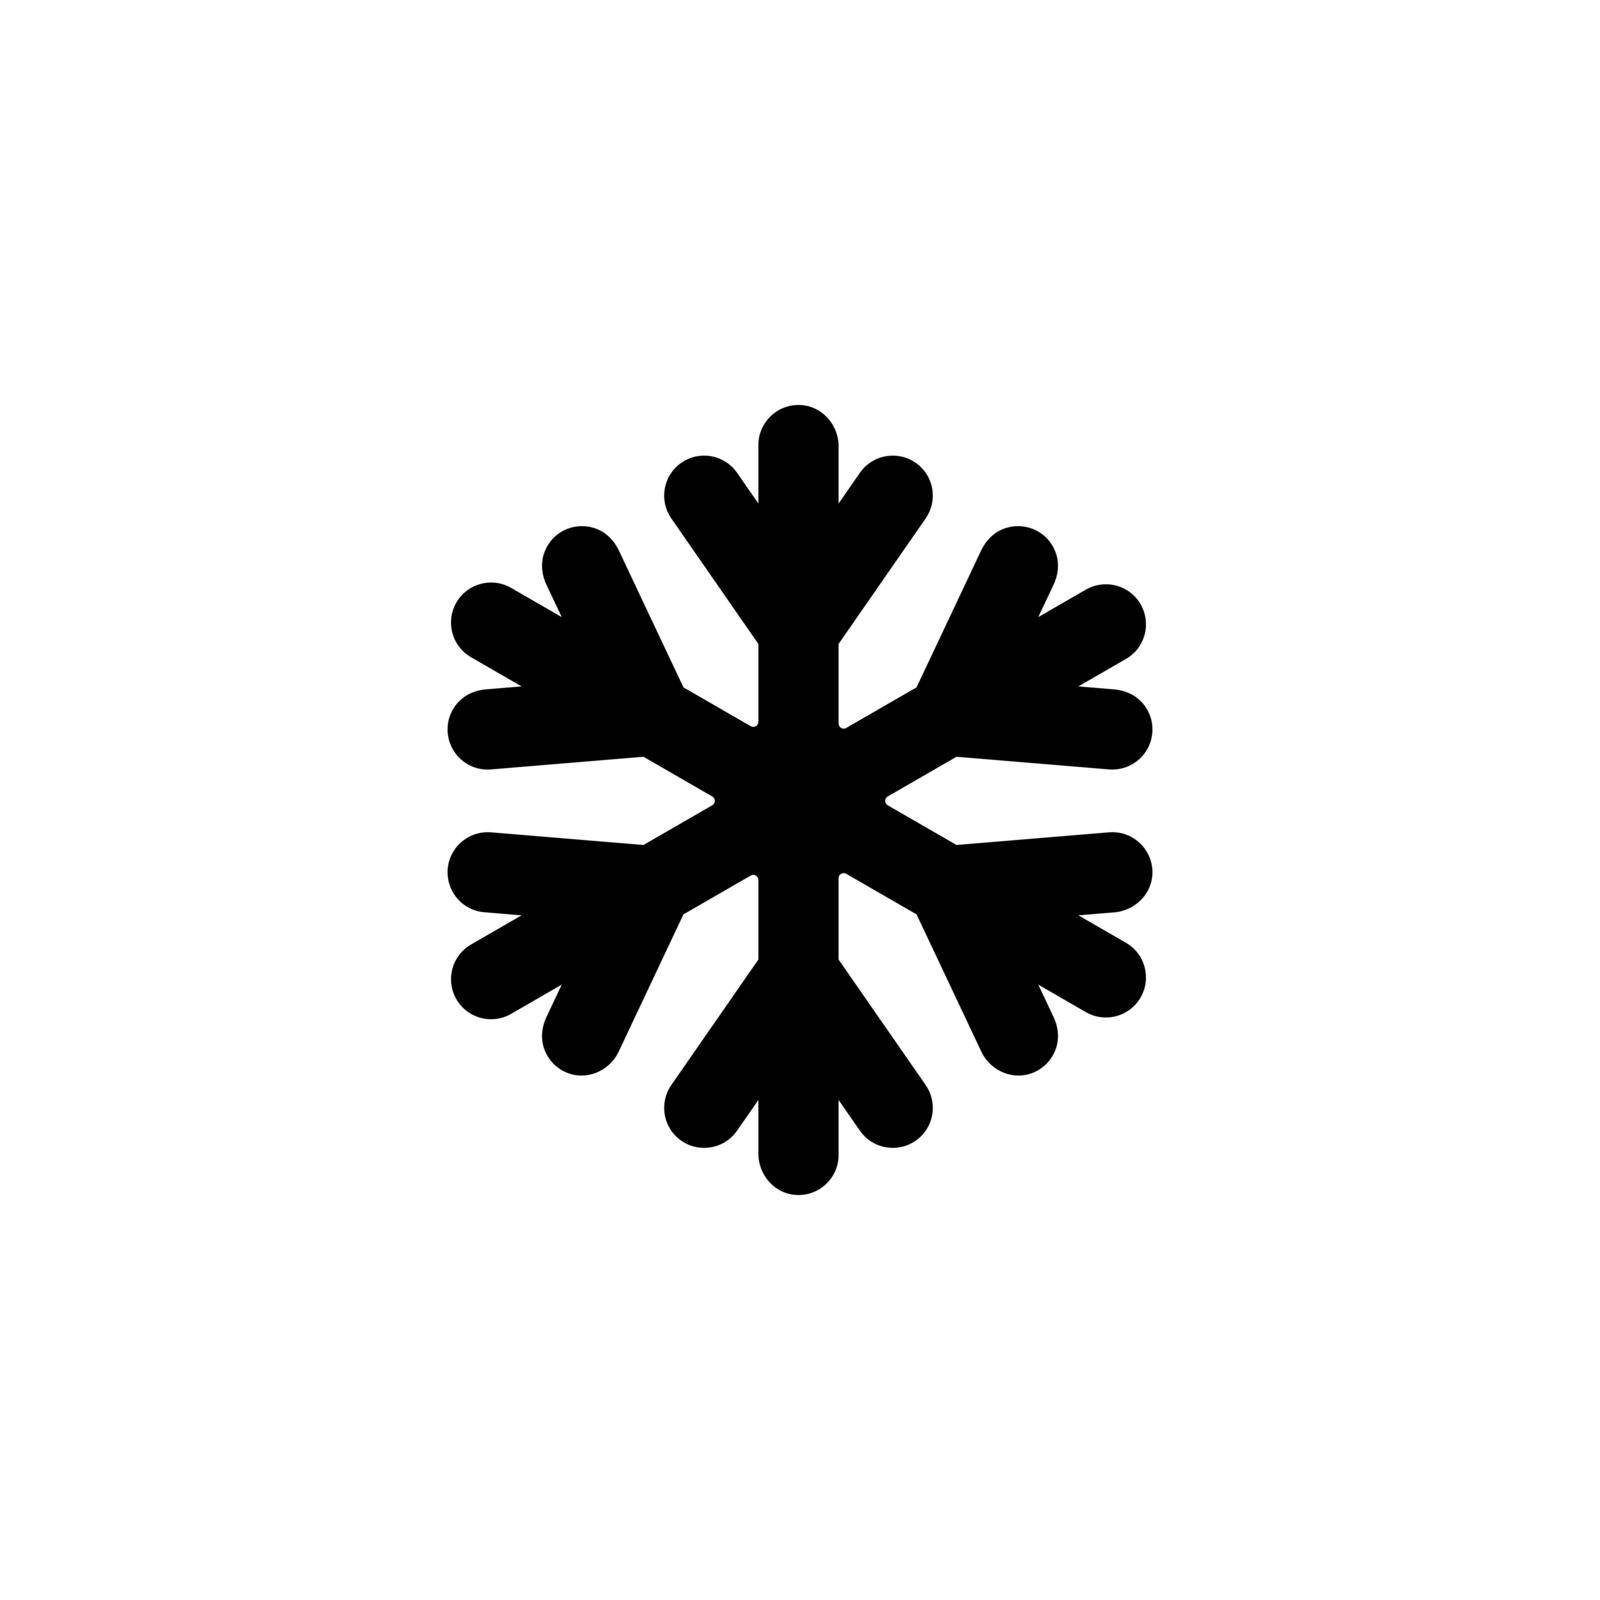 Snowflakes vector glyph icon. Meteorology sign. Graph symbol for travel, tourism and weather web site and apps design, logo, app, UI